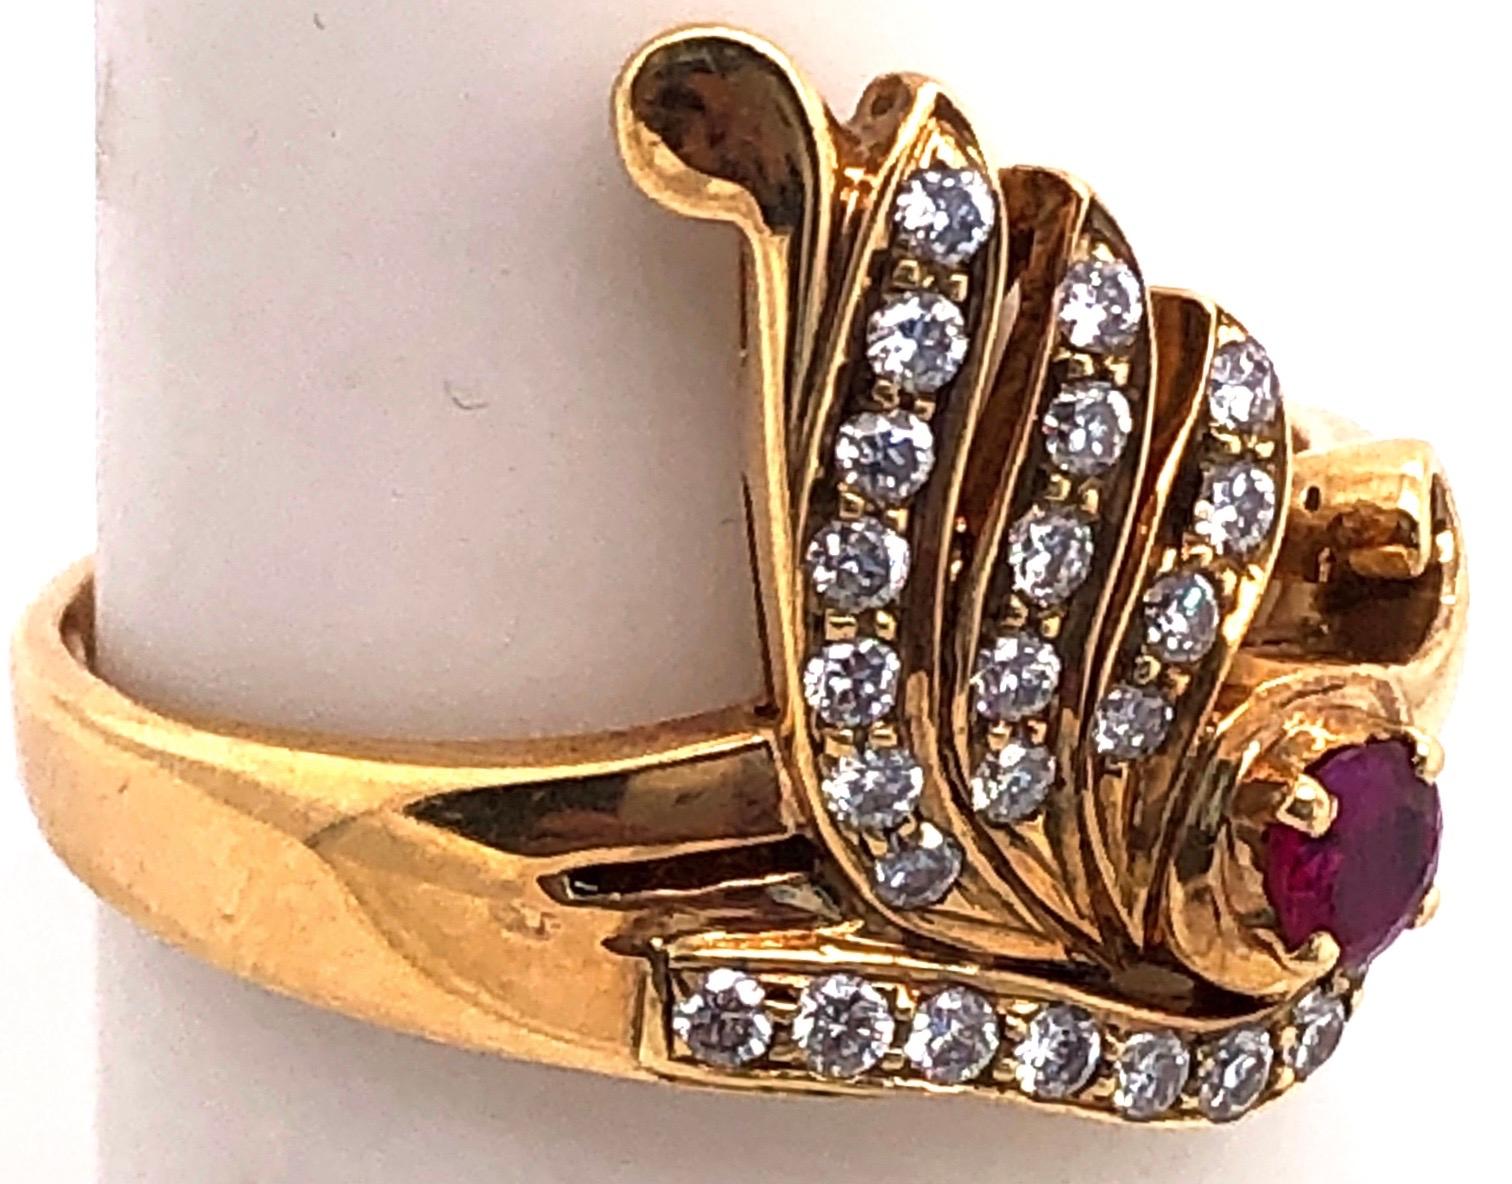 14 Karat Yellow Gold Ruby and Diamond Contemporary Ring
0.40 total diamond weight.
Size 6.5
3.70 grams total weight.